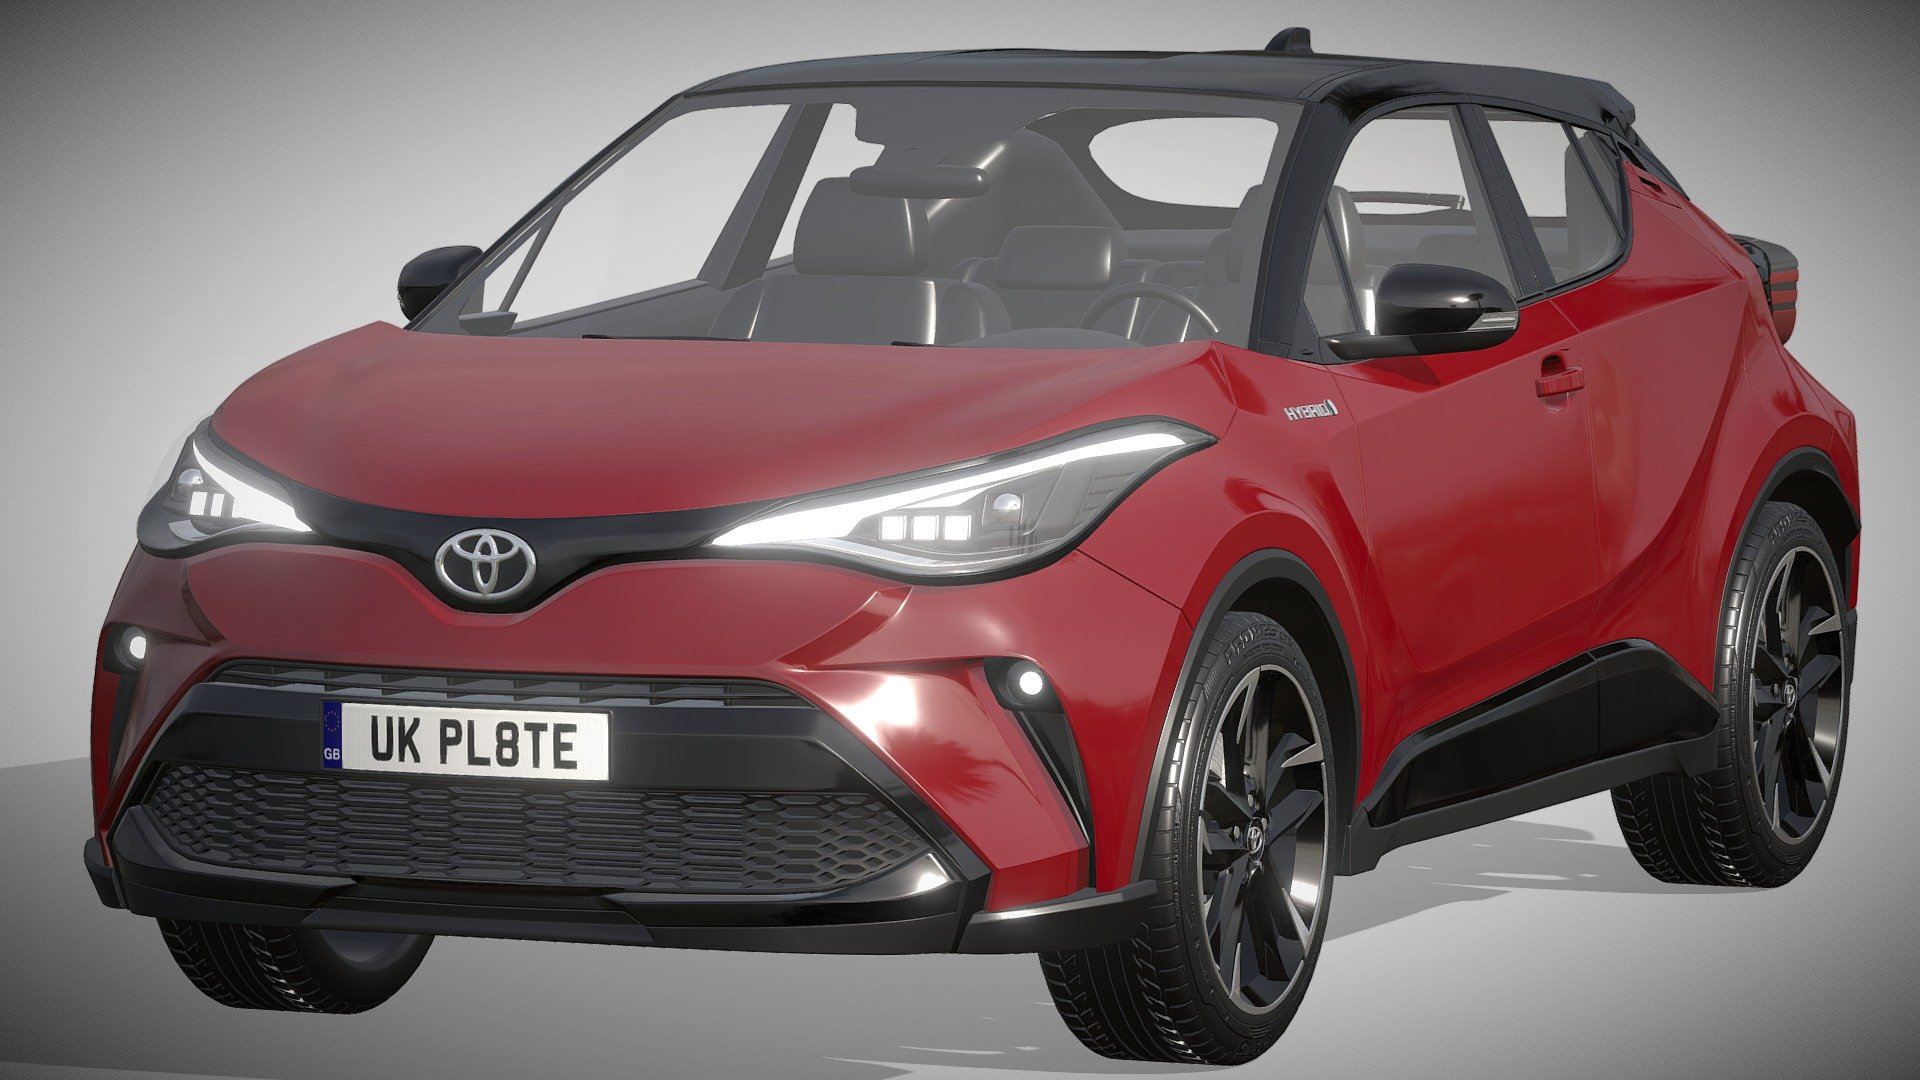 Toyota C-HR 2021

https://www.toyota-europe.com/new-cars/c-hr/

Clean geometry Light weight model, yet completely detailed for HI-Res renders. Use for movies, Advertisements or games

Corona render and materials

All textures include in *.rar files

Lighting setup is not included in the file! - Toyota C-HR 2021 - Buy Royalty Free 3D model by zifir3d 3d model